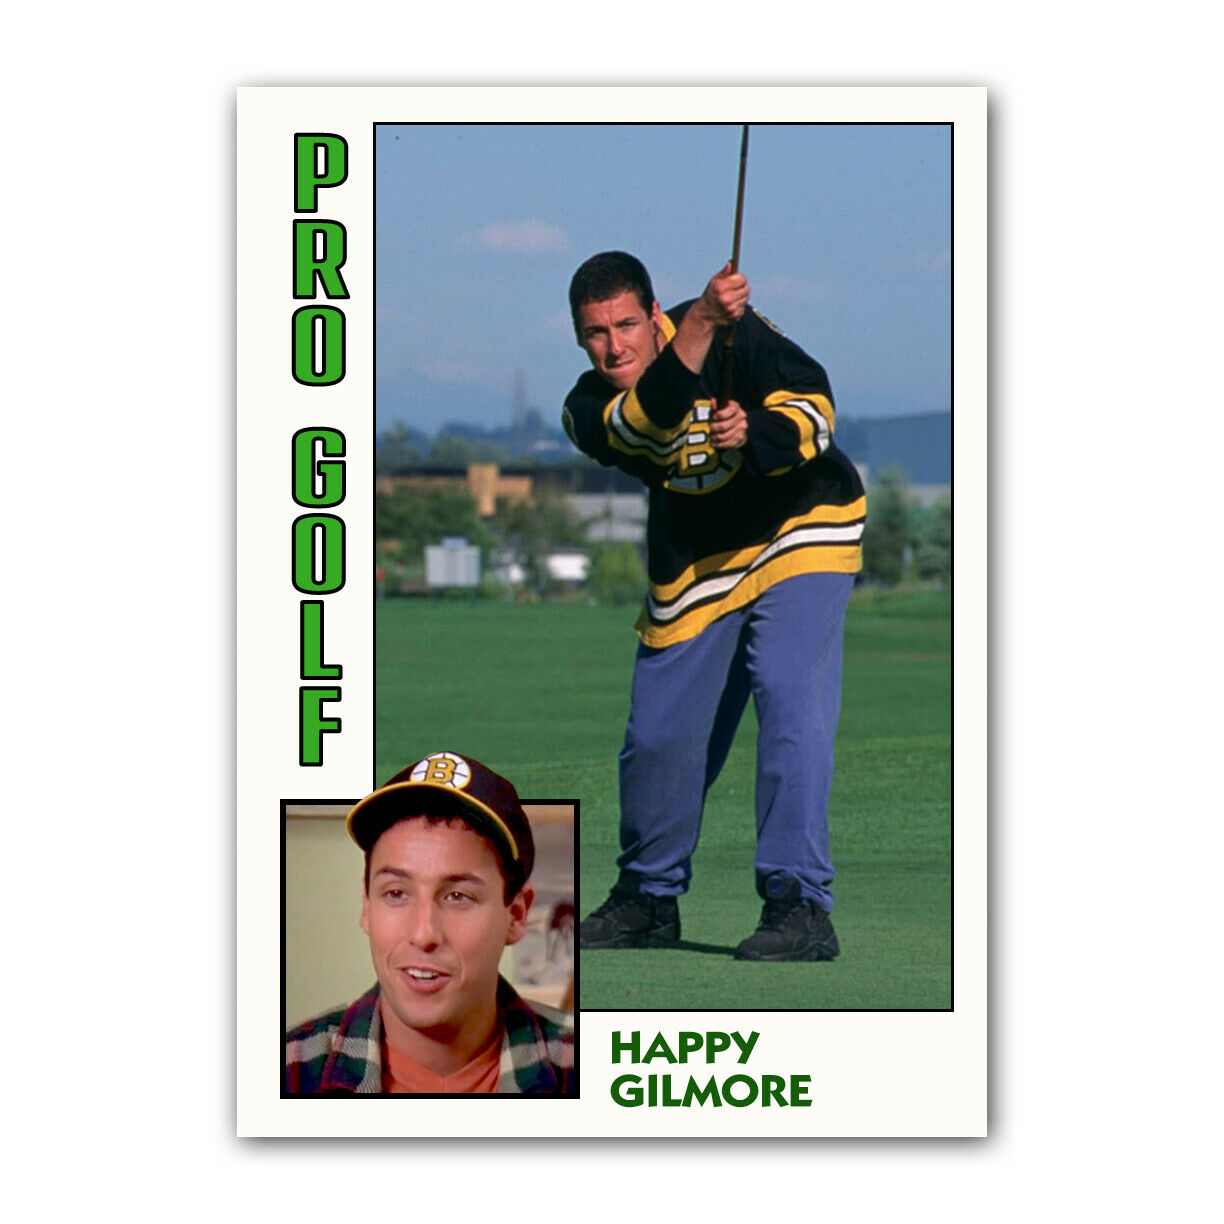 Happy Gilmore Adam Sandler Professional Golf Comedy Trading Card Reprint Aceo